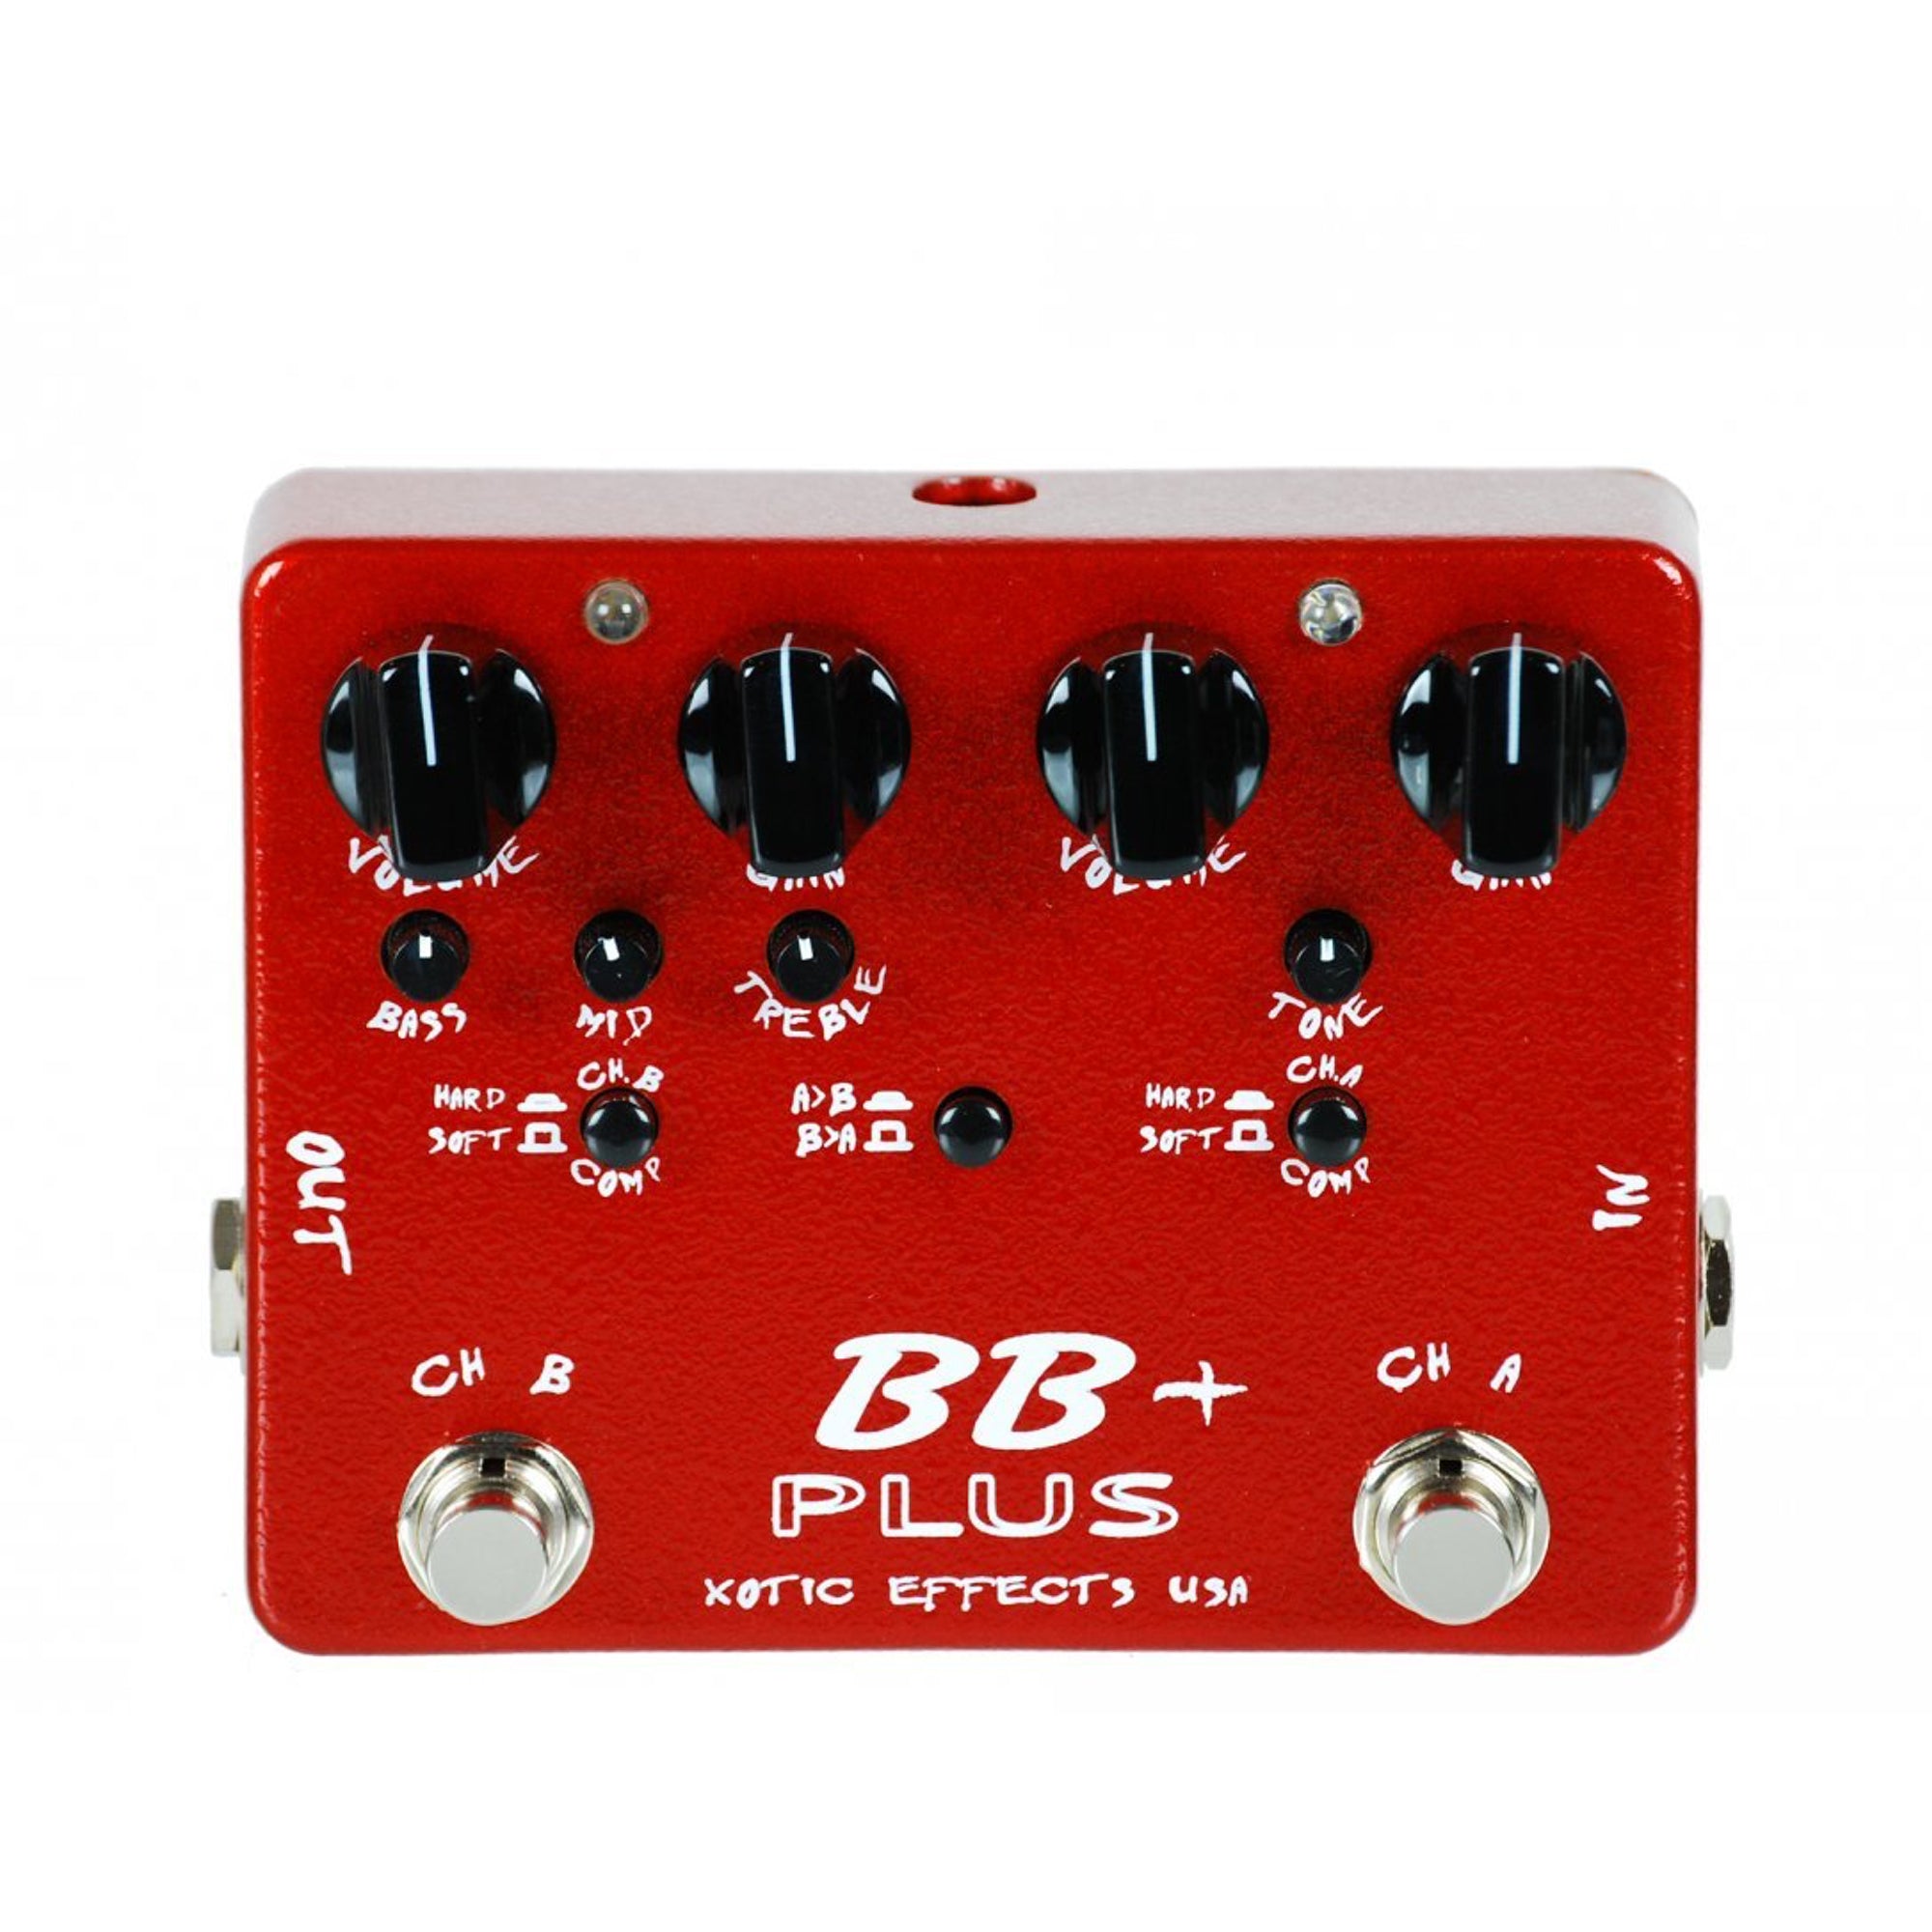 Xotic Effects BB Plus Preamp/Boost | Palen Music Guitar Effects $196.00  Xotic Effects